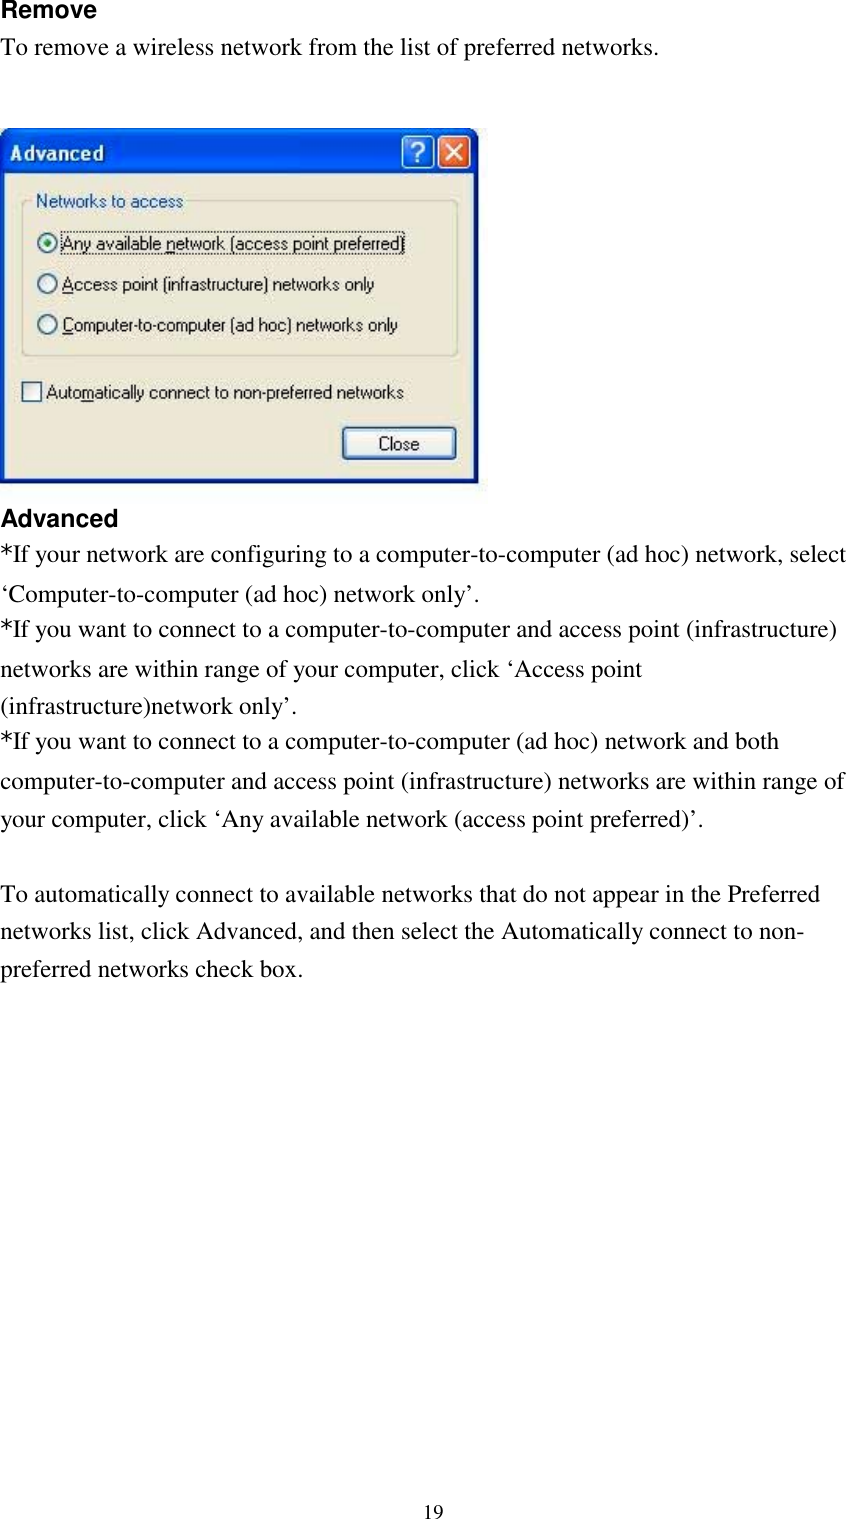 19RemoveTo remove a wireless network from the list of preferred networks.Advanced*If your network are configuring to a computer-to-computer (ad hoc) network, select‘Computer-to-computer (ad hoc) network only’.*If you want to connect to a computer-to-computer and access point (infrastructure)networks are within range of your computer, click ‘Access point(infrastructure)network only’.*If you want to connect to a computer-to-computer (ad hoc) network and bothcomputer-to-computer and access point (infrastructure) networks are within range ofyour computer, click ‘Any available network (access point preferred)’.To automatically connect to available networks that do not appear in the Preferrednetworks list, click Advanced, and then select the Automatically connect to non-preferred networks check box.